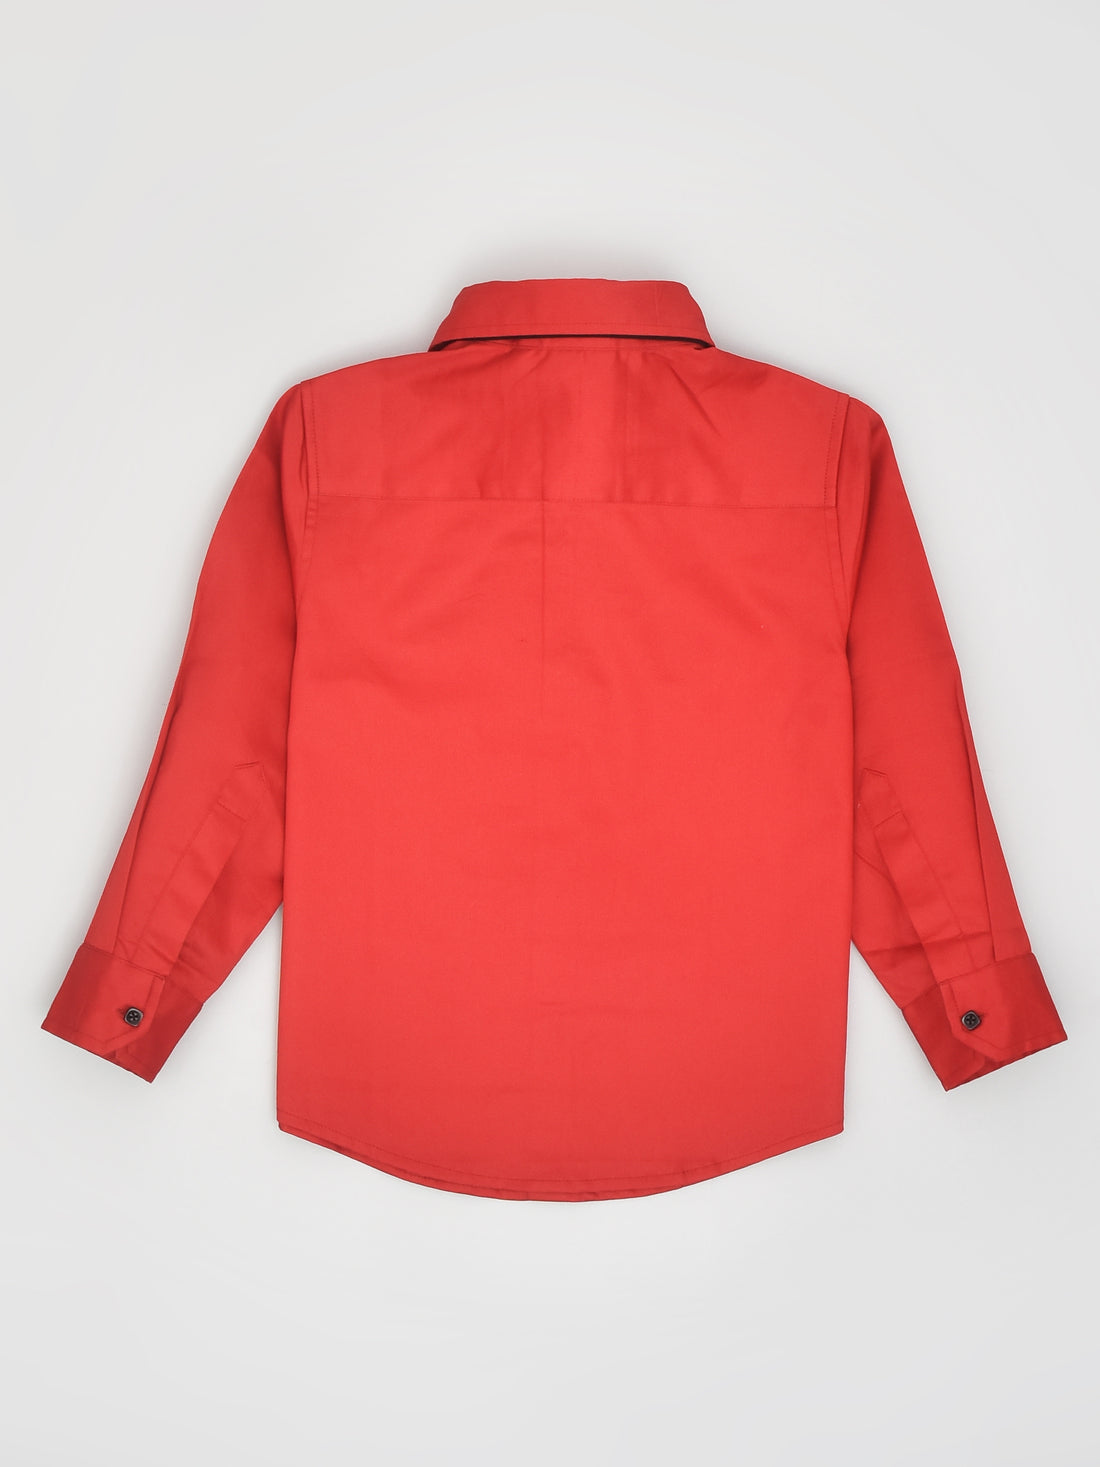 Red Formal Shirt with Black Tie